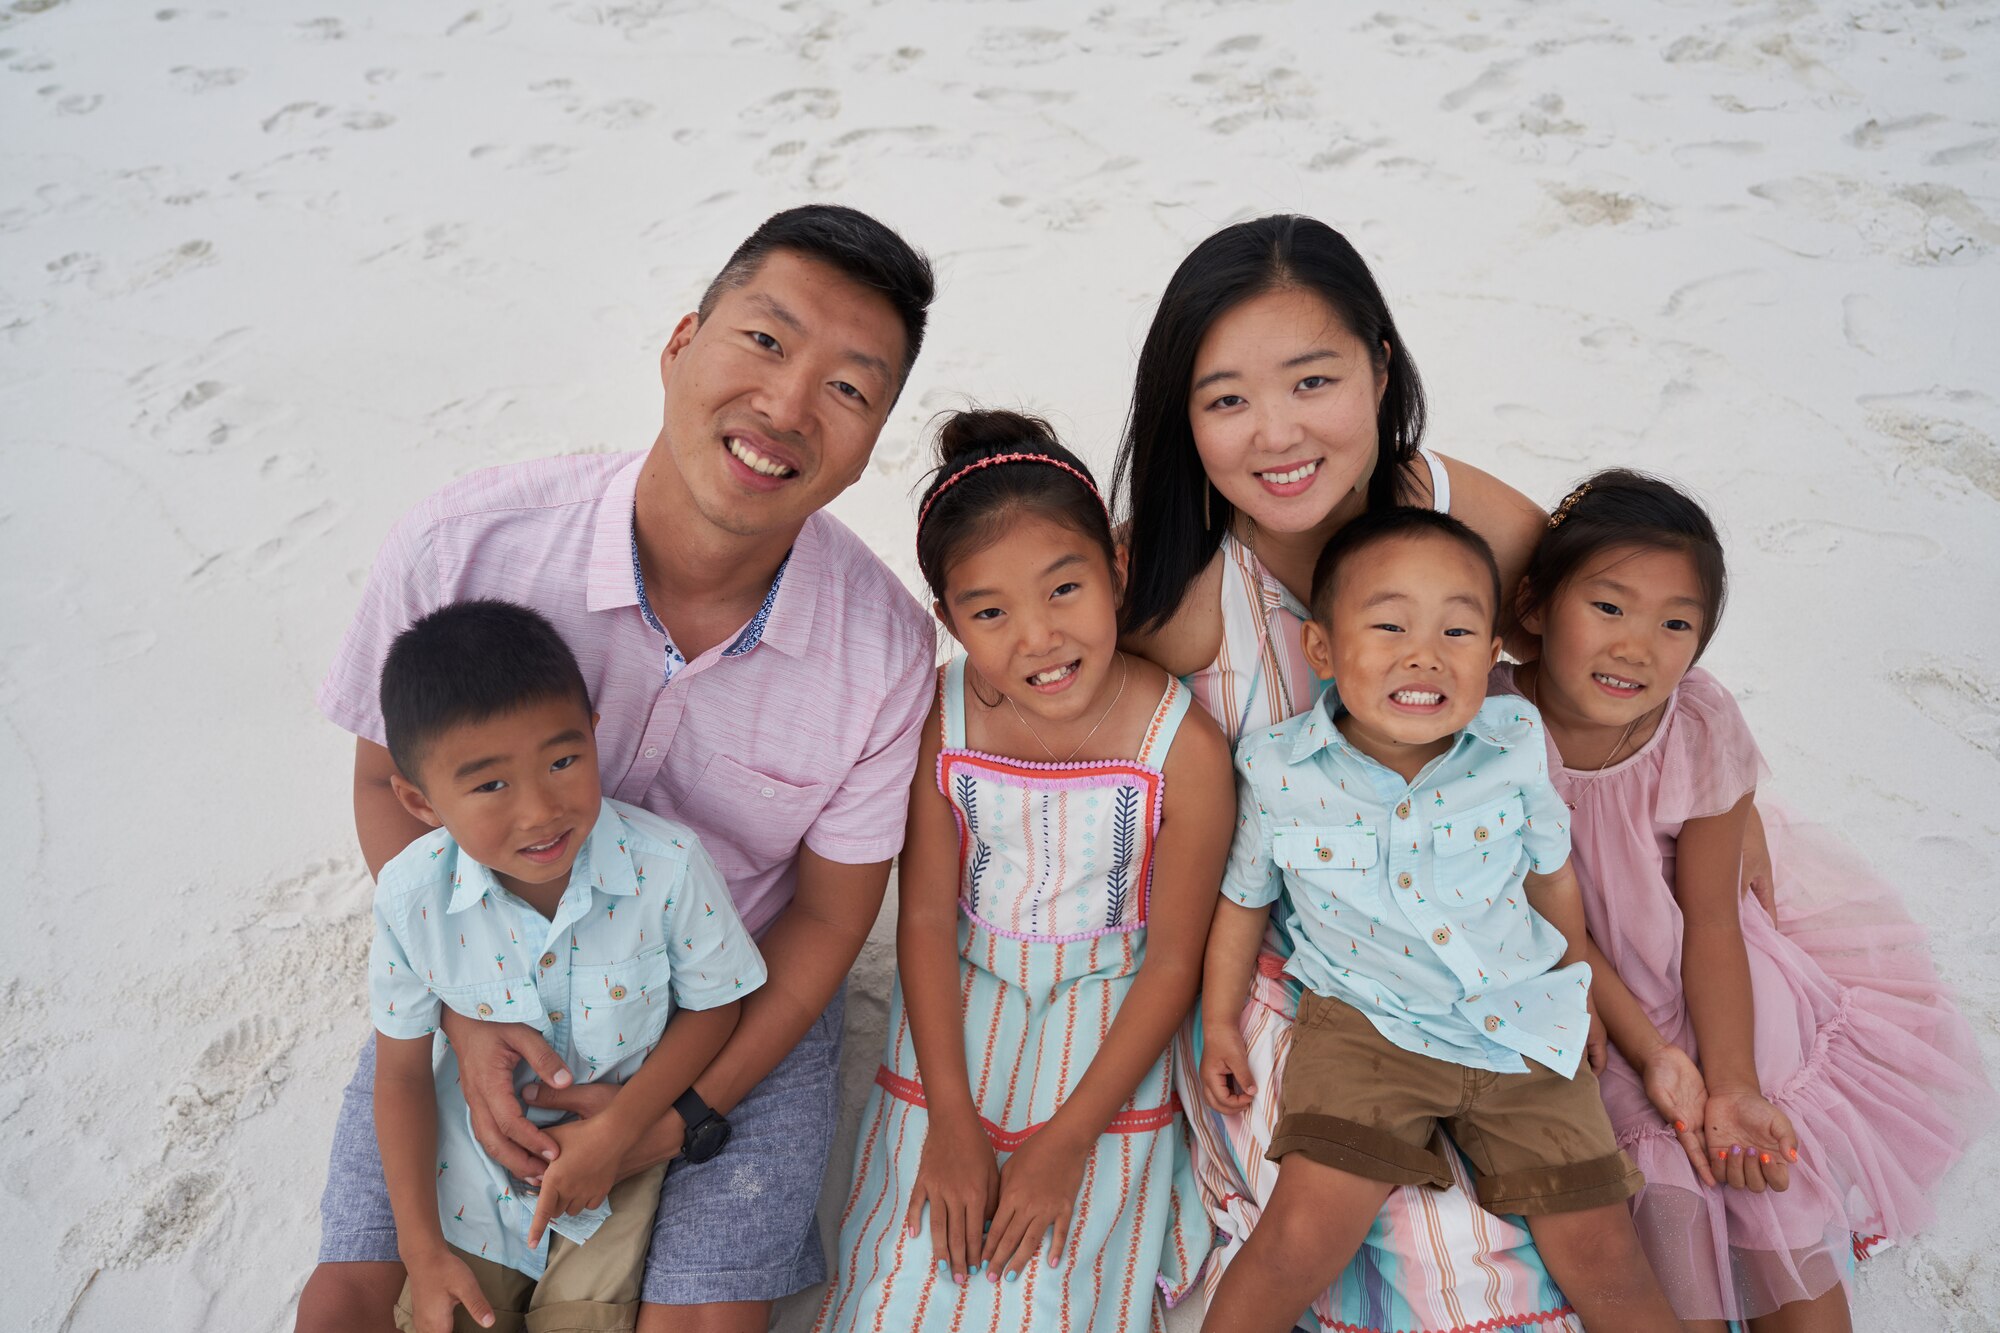 Maj. Jay Park, director of operations for Air Force Recruiting Service’s Detachment 1, and his wife, Anna, and their children. Park’s parents along immigrated to the U.S. when he was an 8 year old.